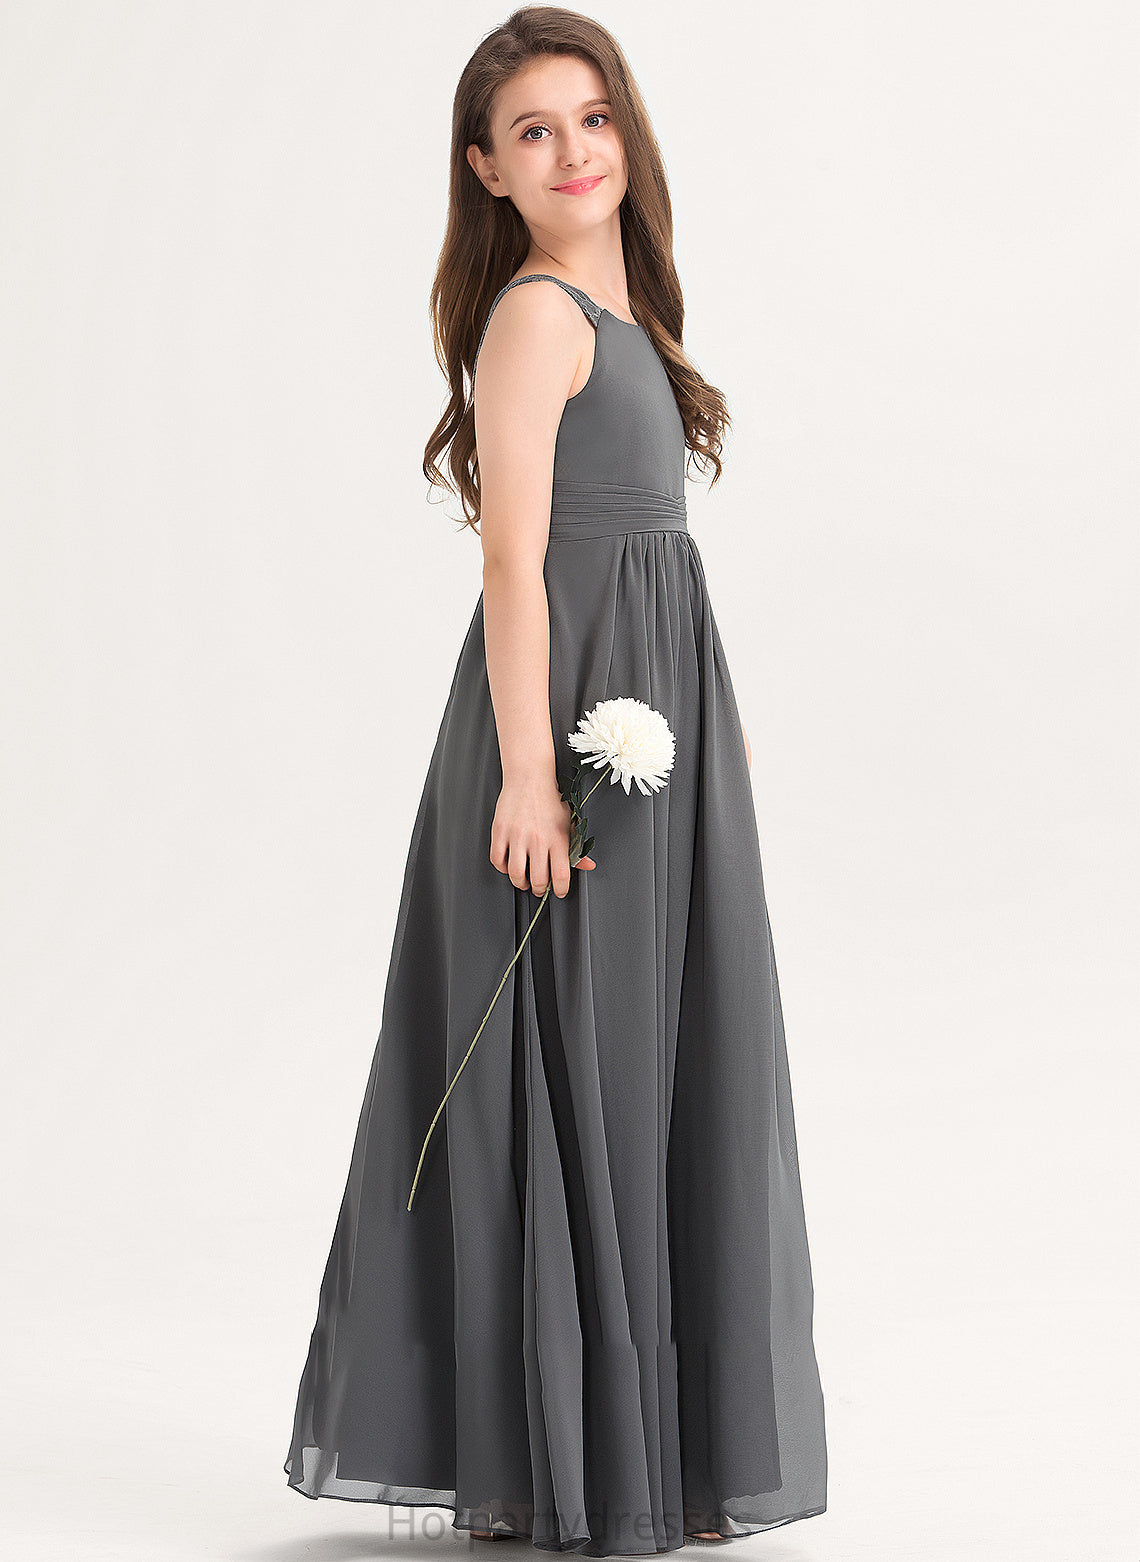 With Lace Scoop Chiffon Neck Floor-Length Ruffle Junior Bridesmaid Dresses A-Line Lina